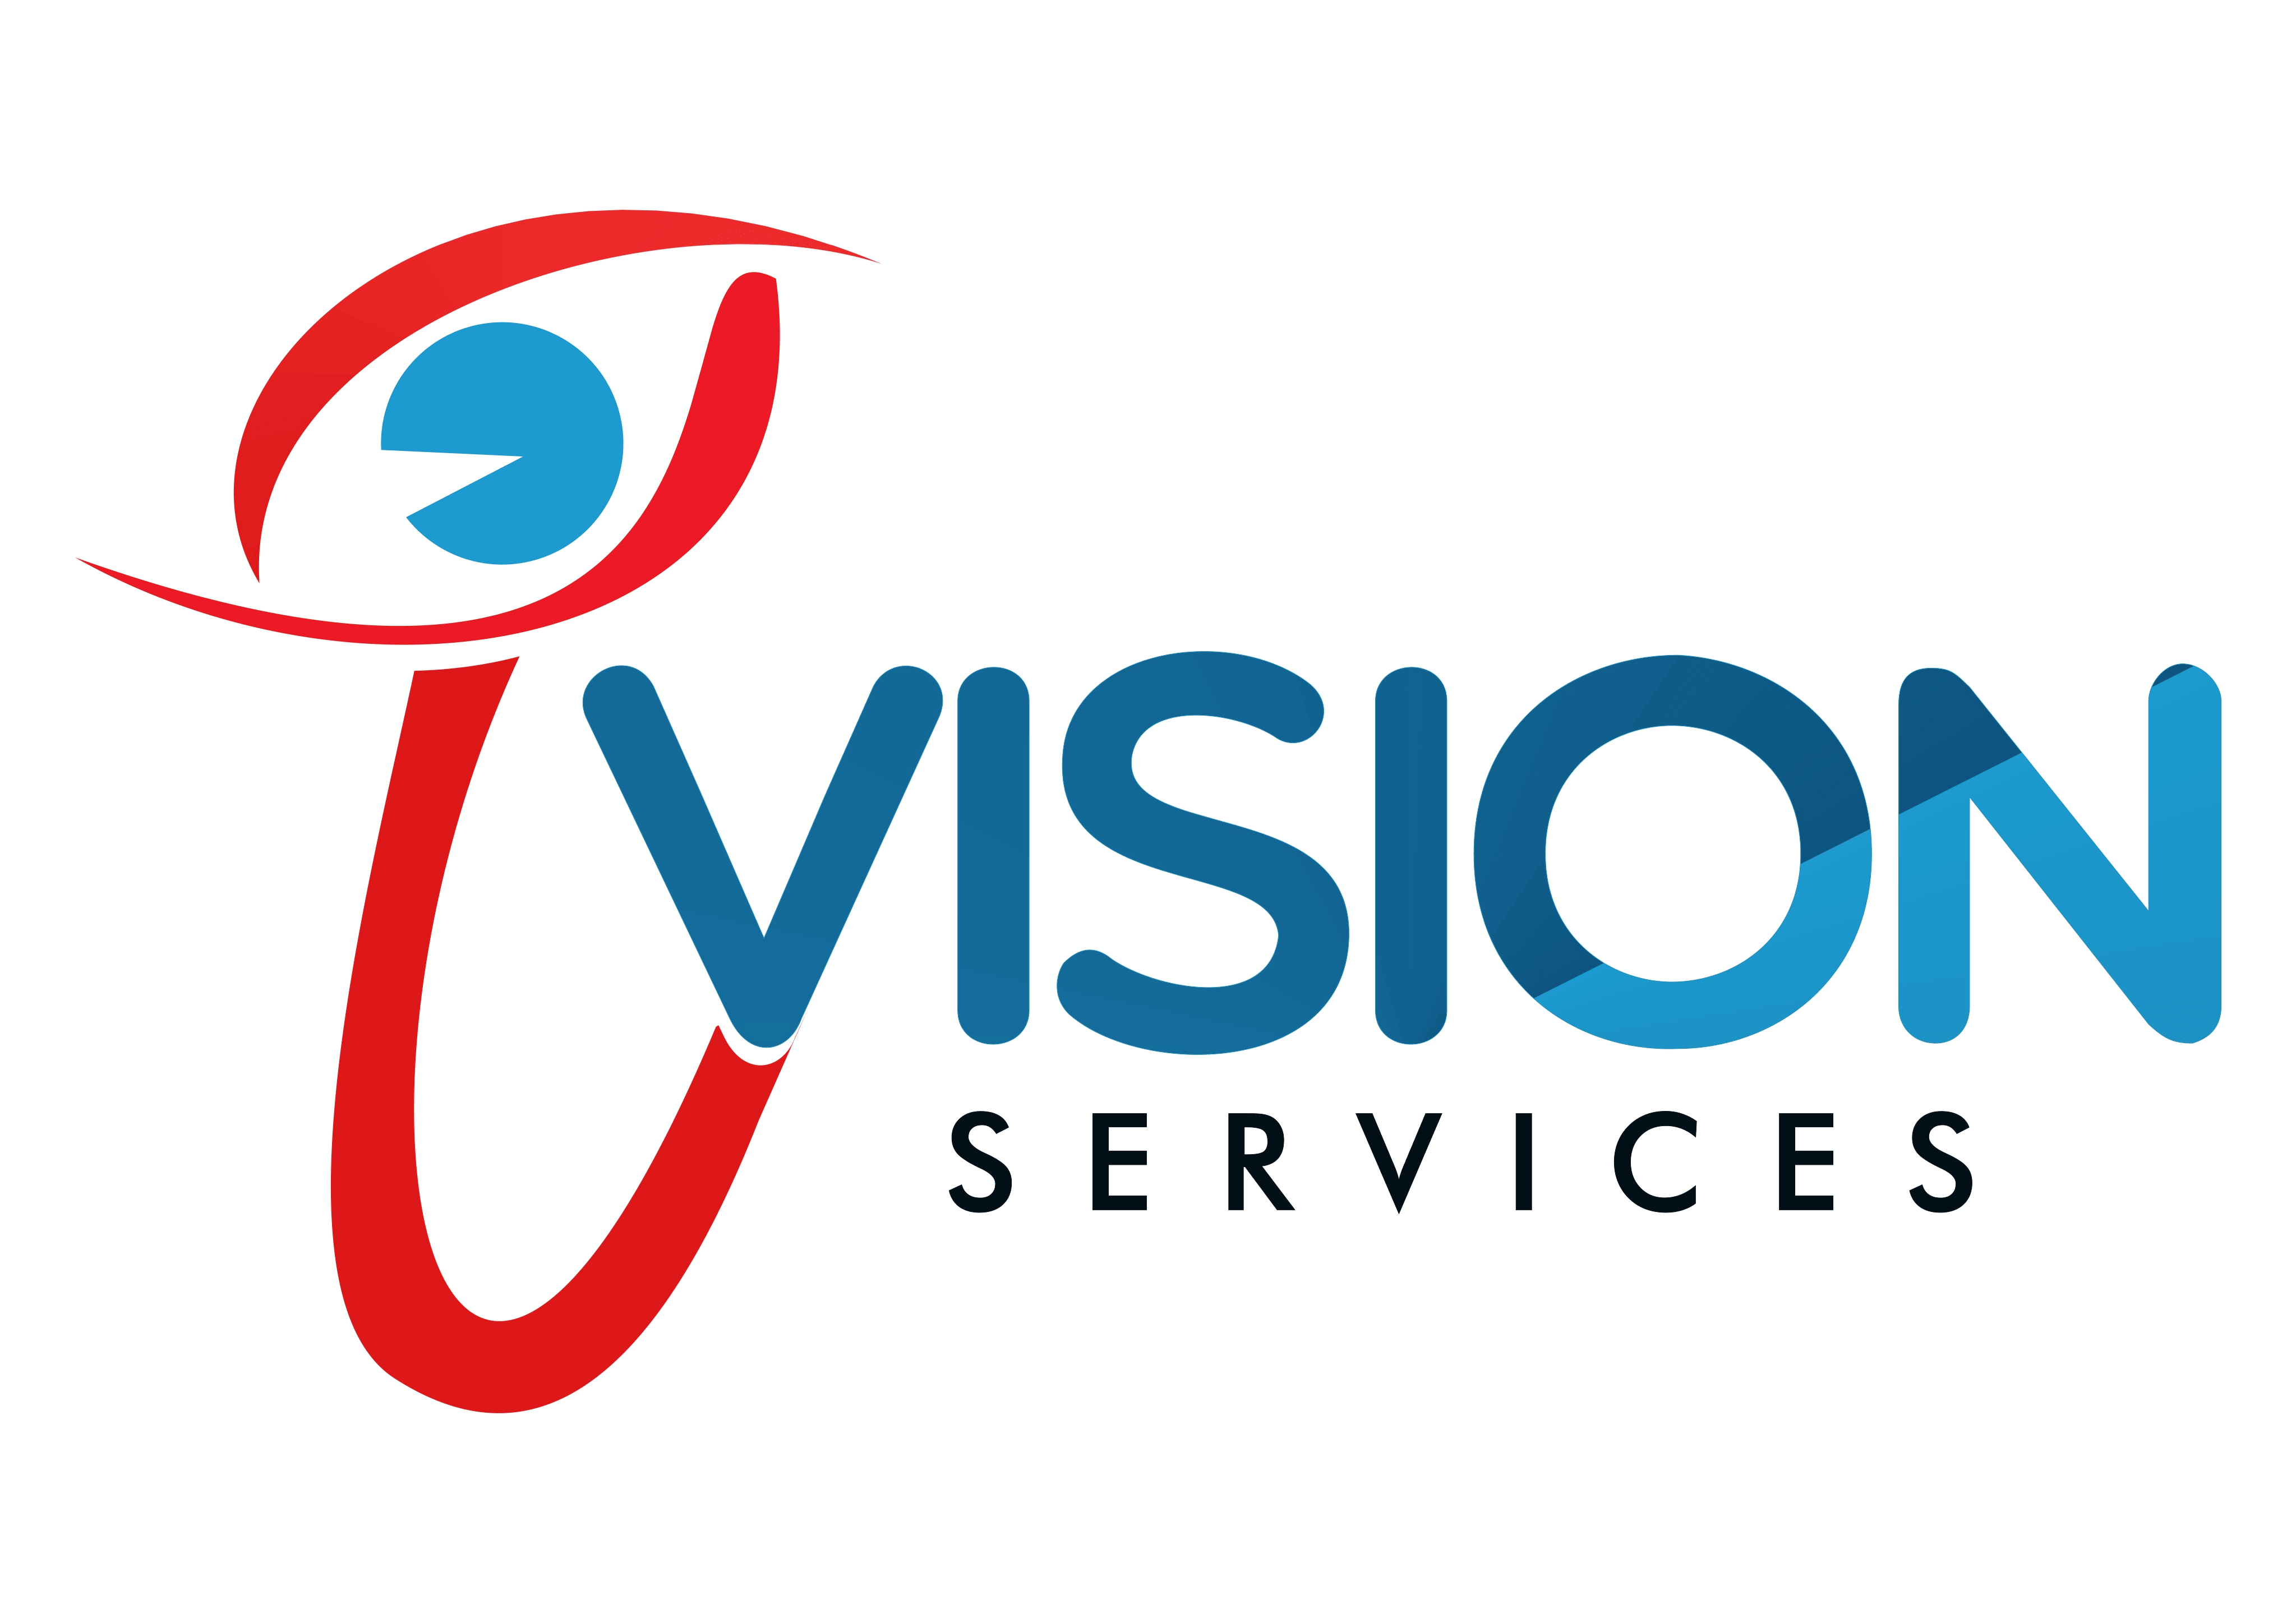 Ivision Services